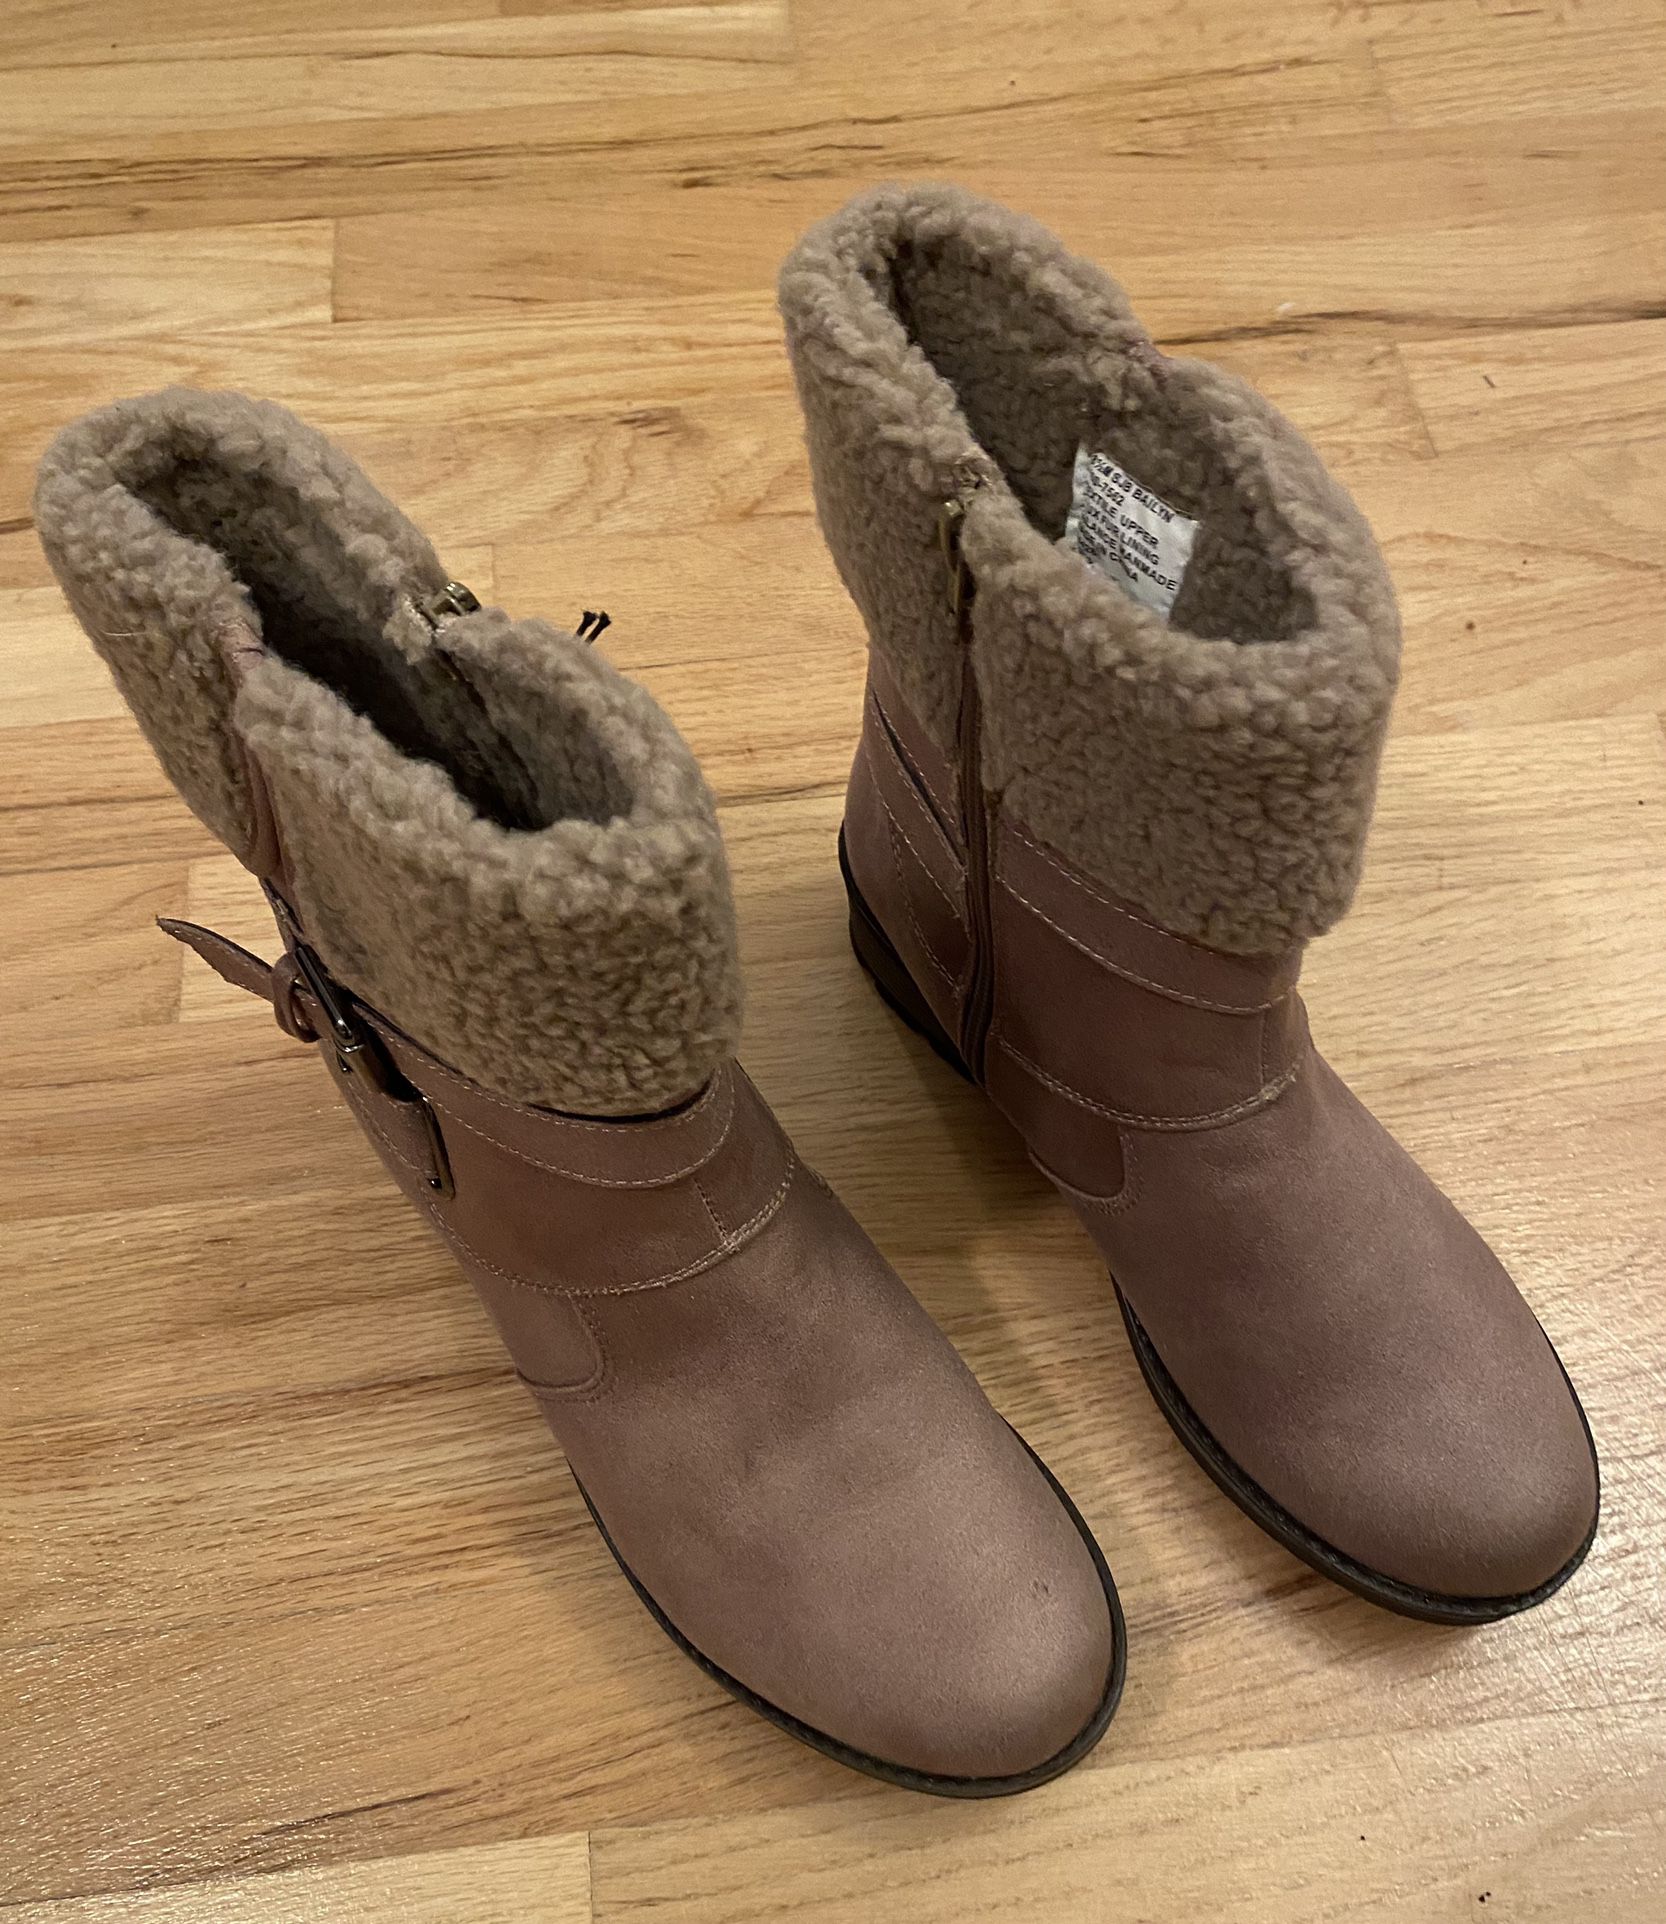 Women’s boots, size 8 1/2 New with tag